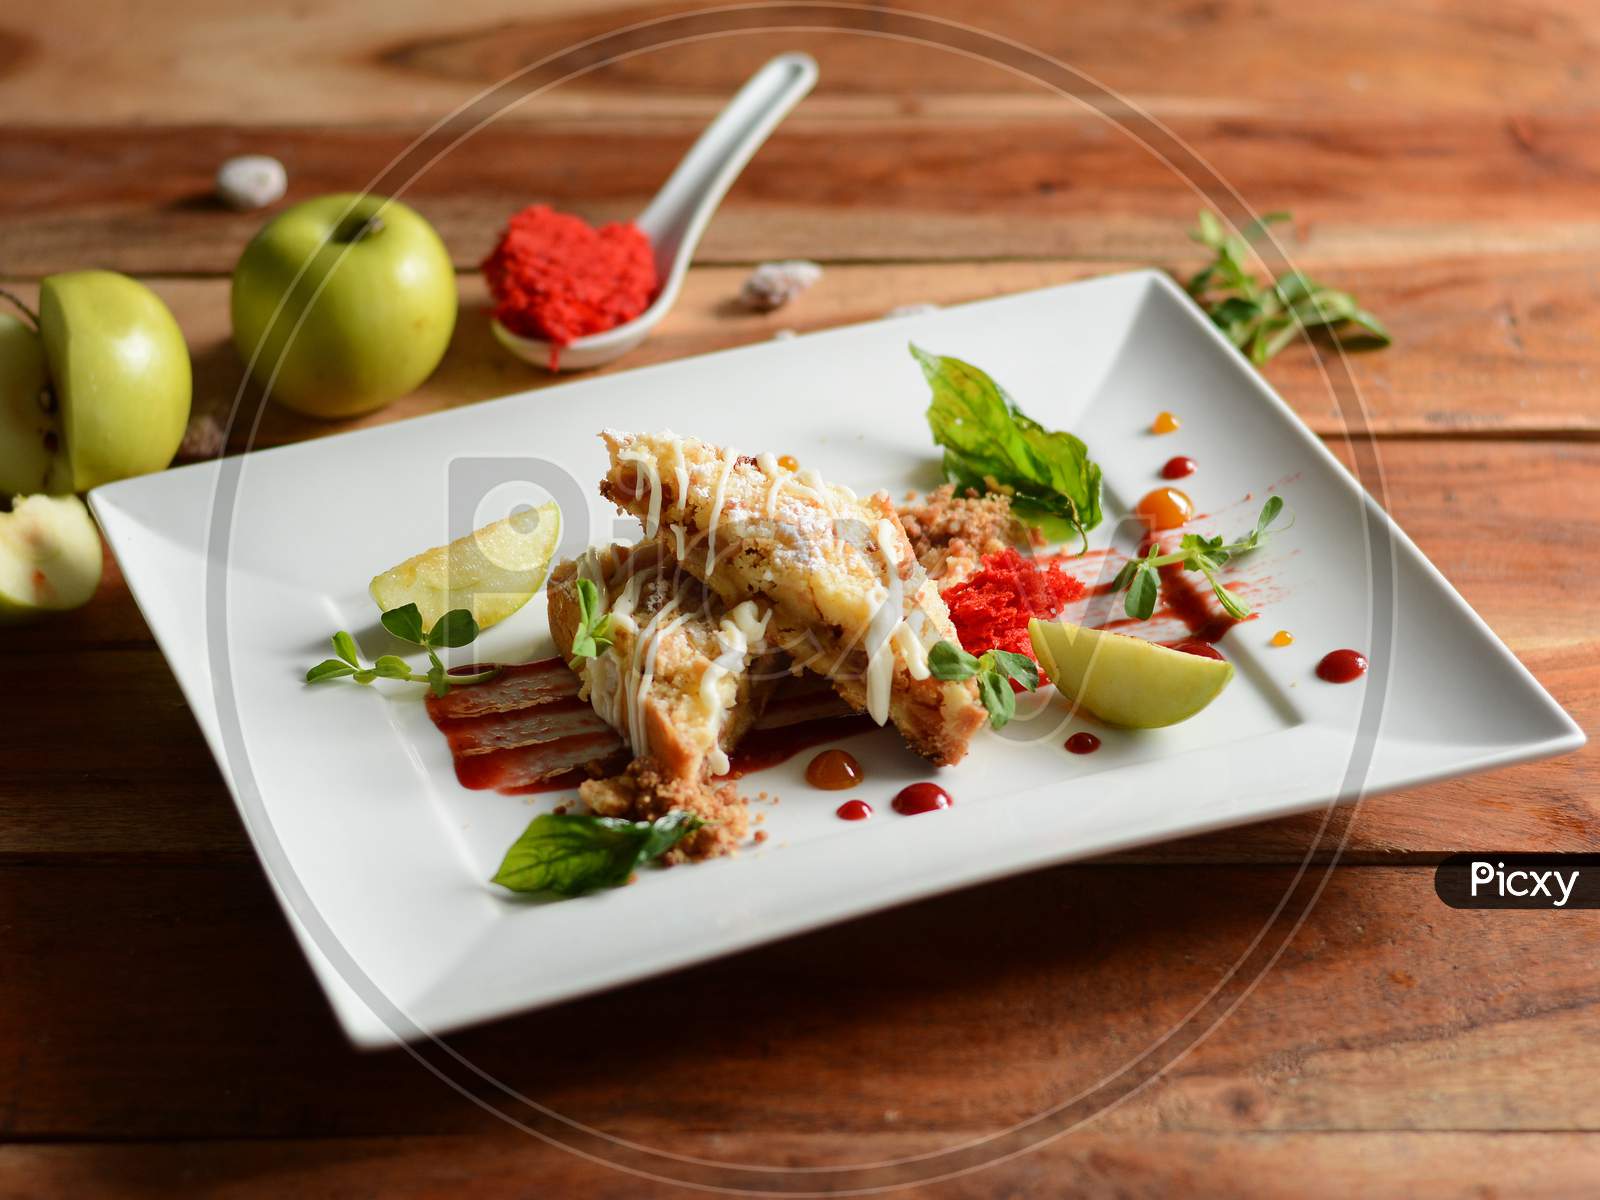 Apple Pie With Basil Served In A White Plate On A Rustic Wooden Table, Selective Focus